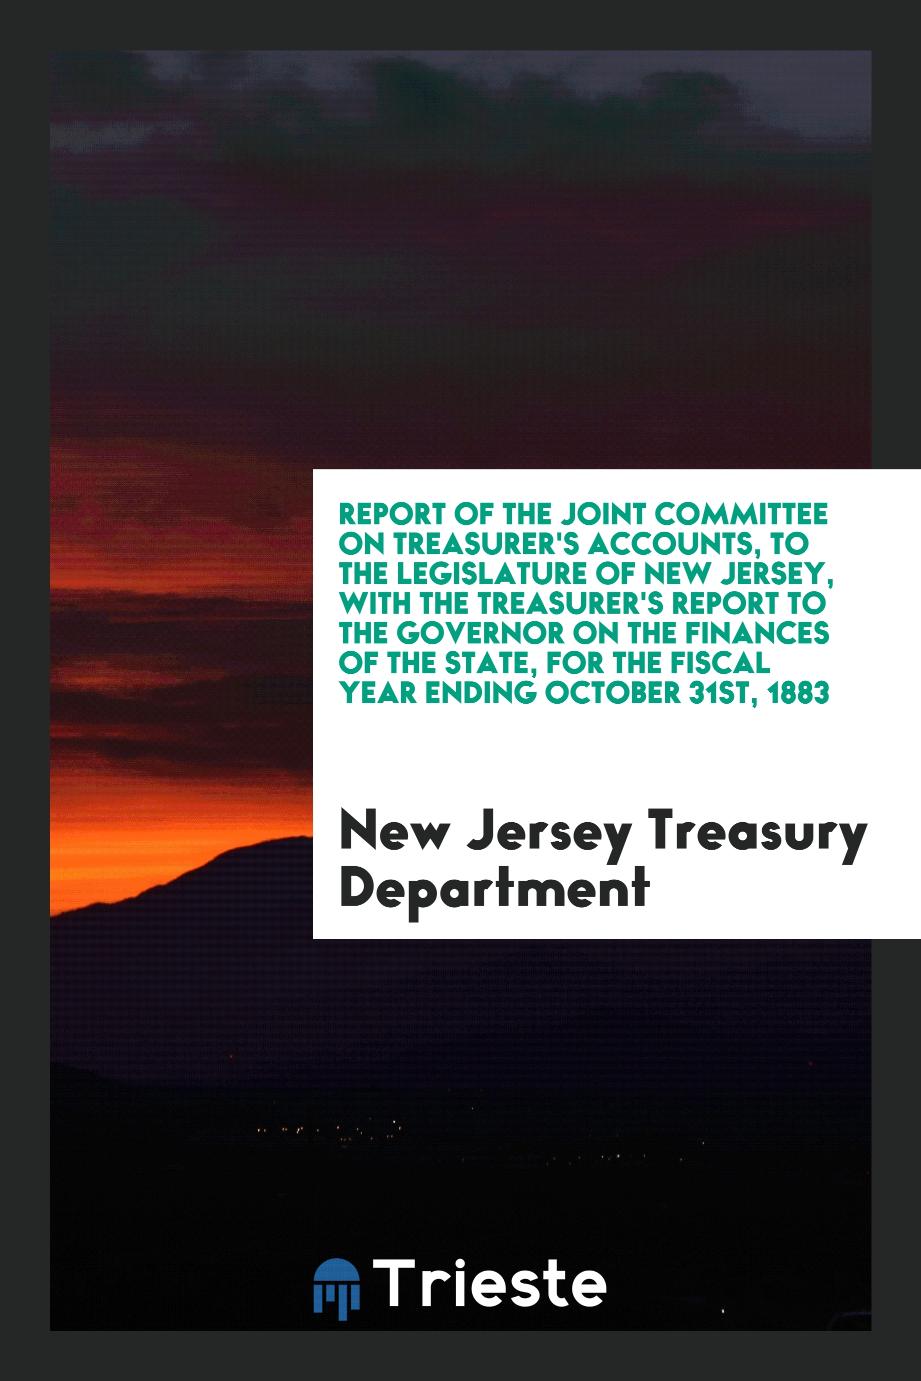 Report of the Joint Committee on Treasurer's Accounts, to the Legislature of New Jersey, with the Treasurer's Report to the Governor on the Finances of the State, for the Fiscal Year Ending October 31st, 1883